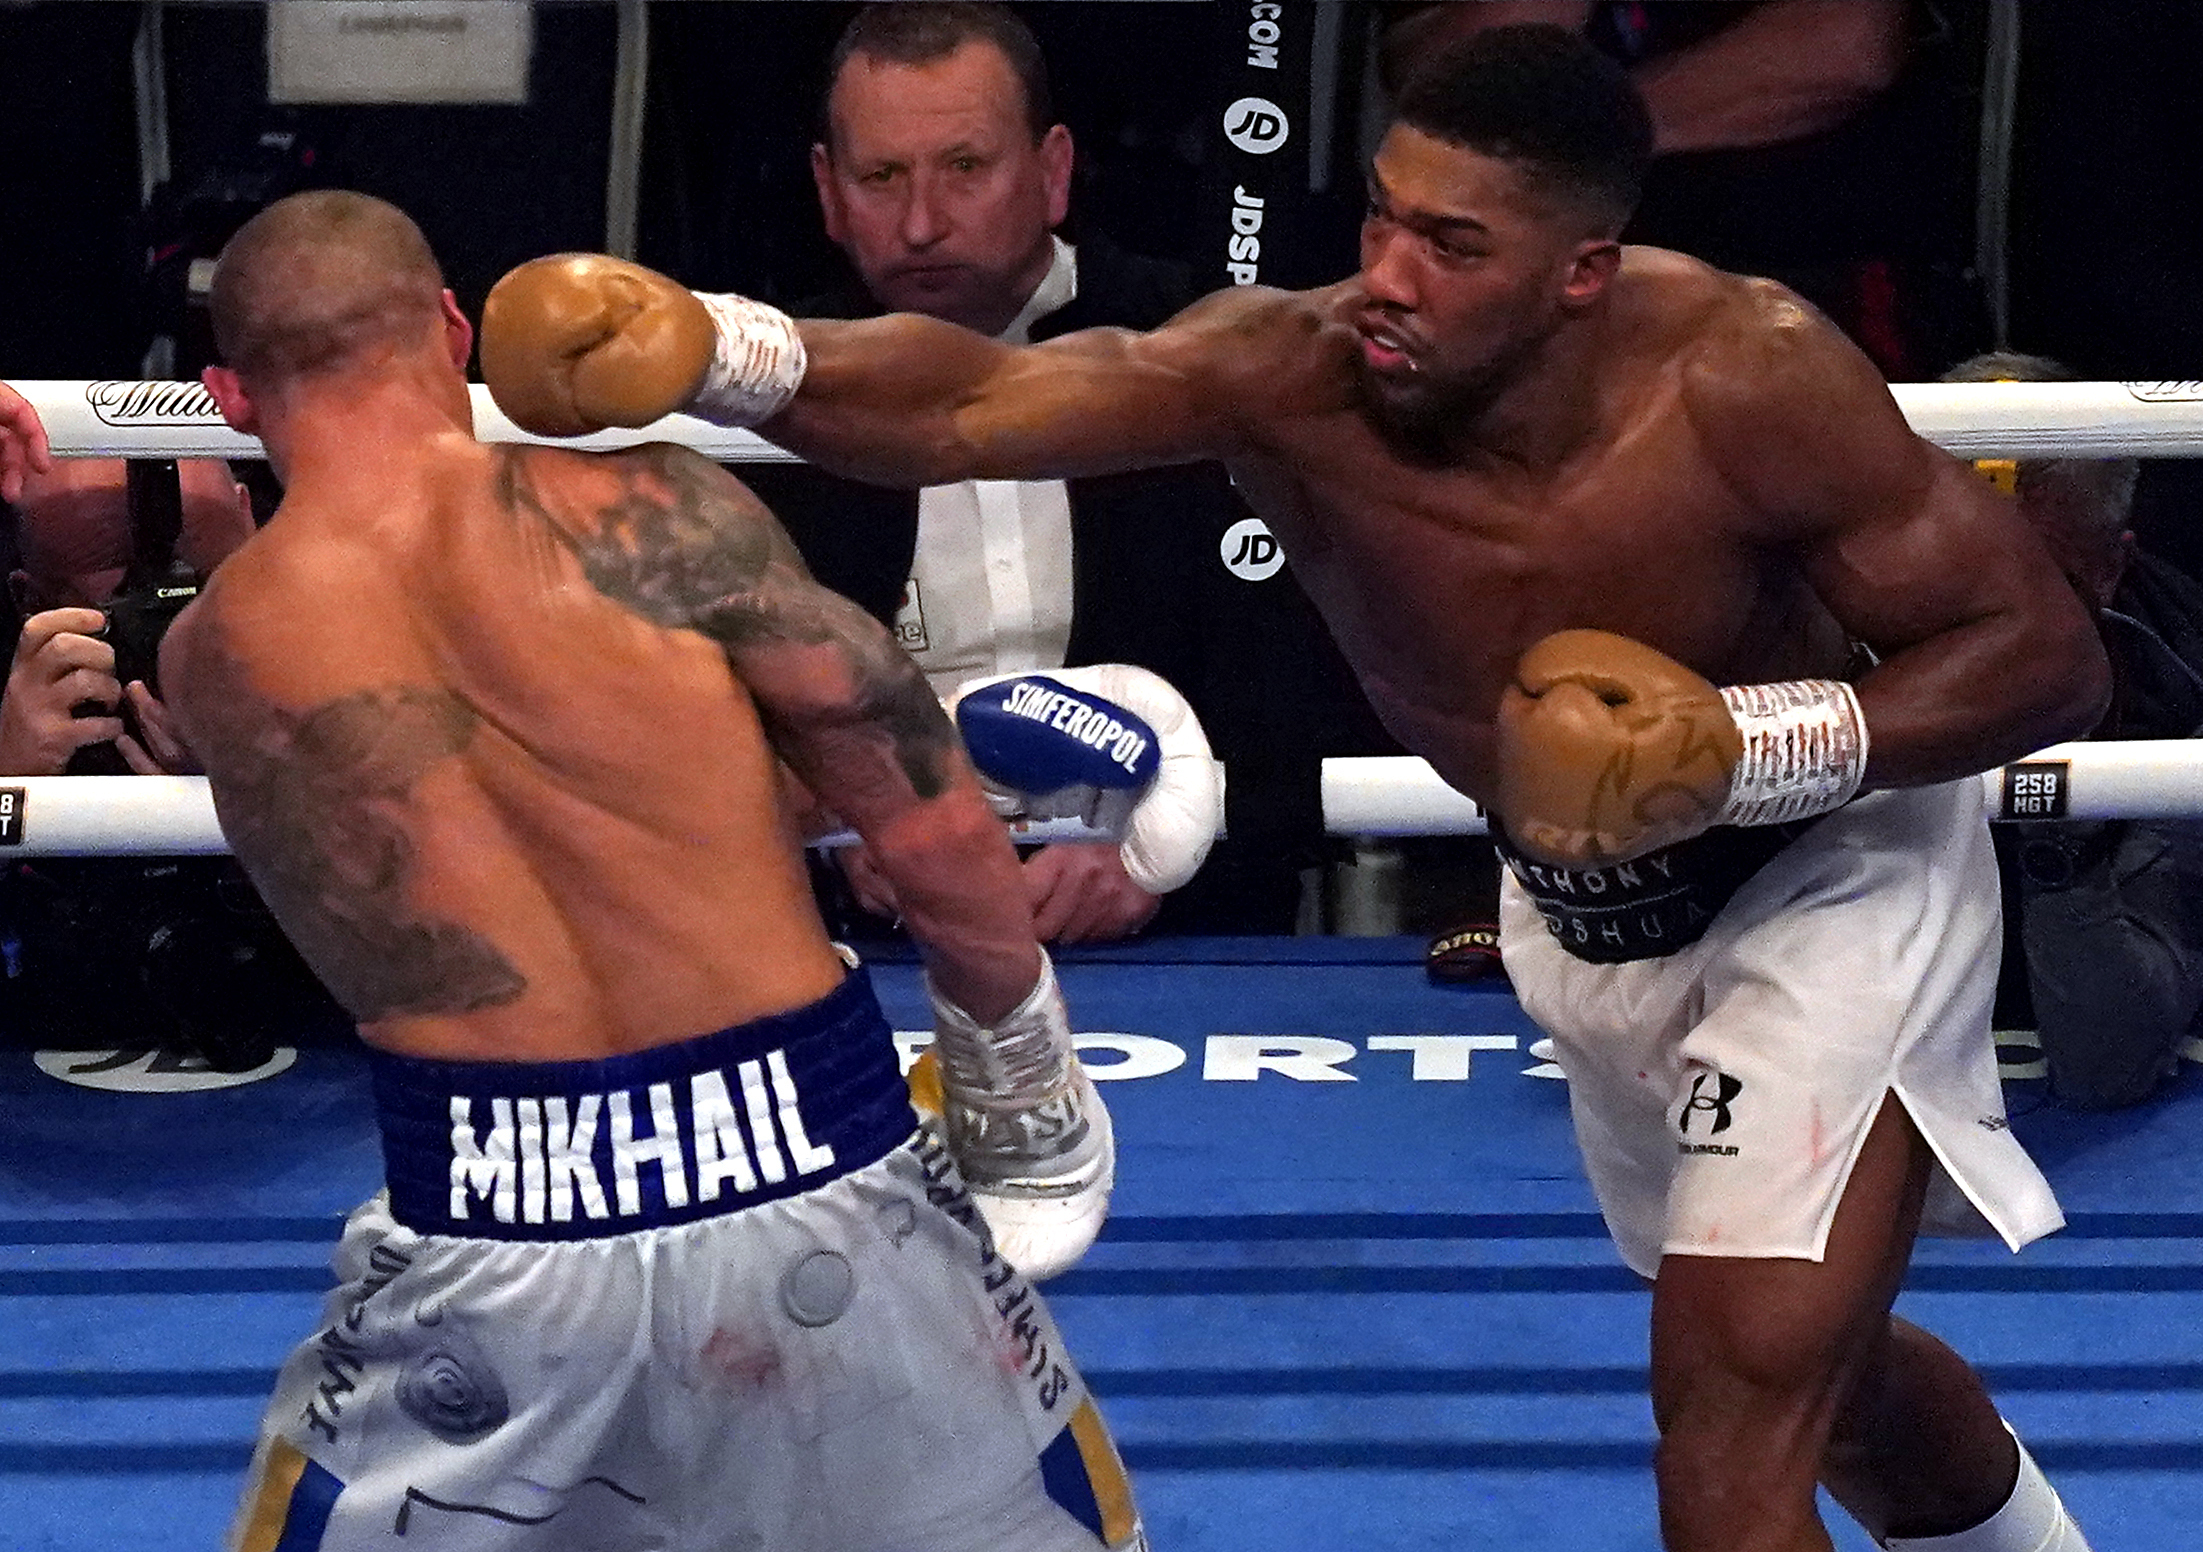 Anthony Joshua attempts a punch on Oleksandr Usyk in the WBA, WBO, IBF and IBO World Heavyweight titles match at the Tottenham Hotspur Stadium. Picture date: Saturday September 25, 2021.